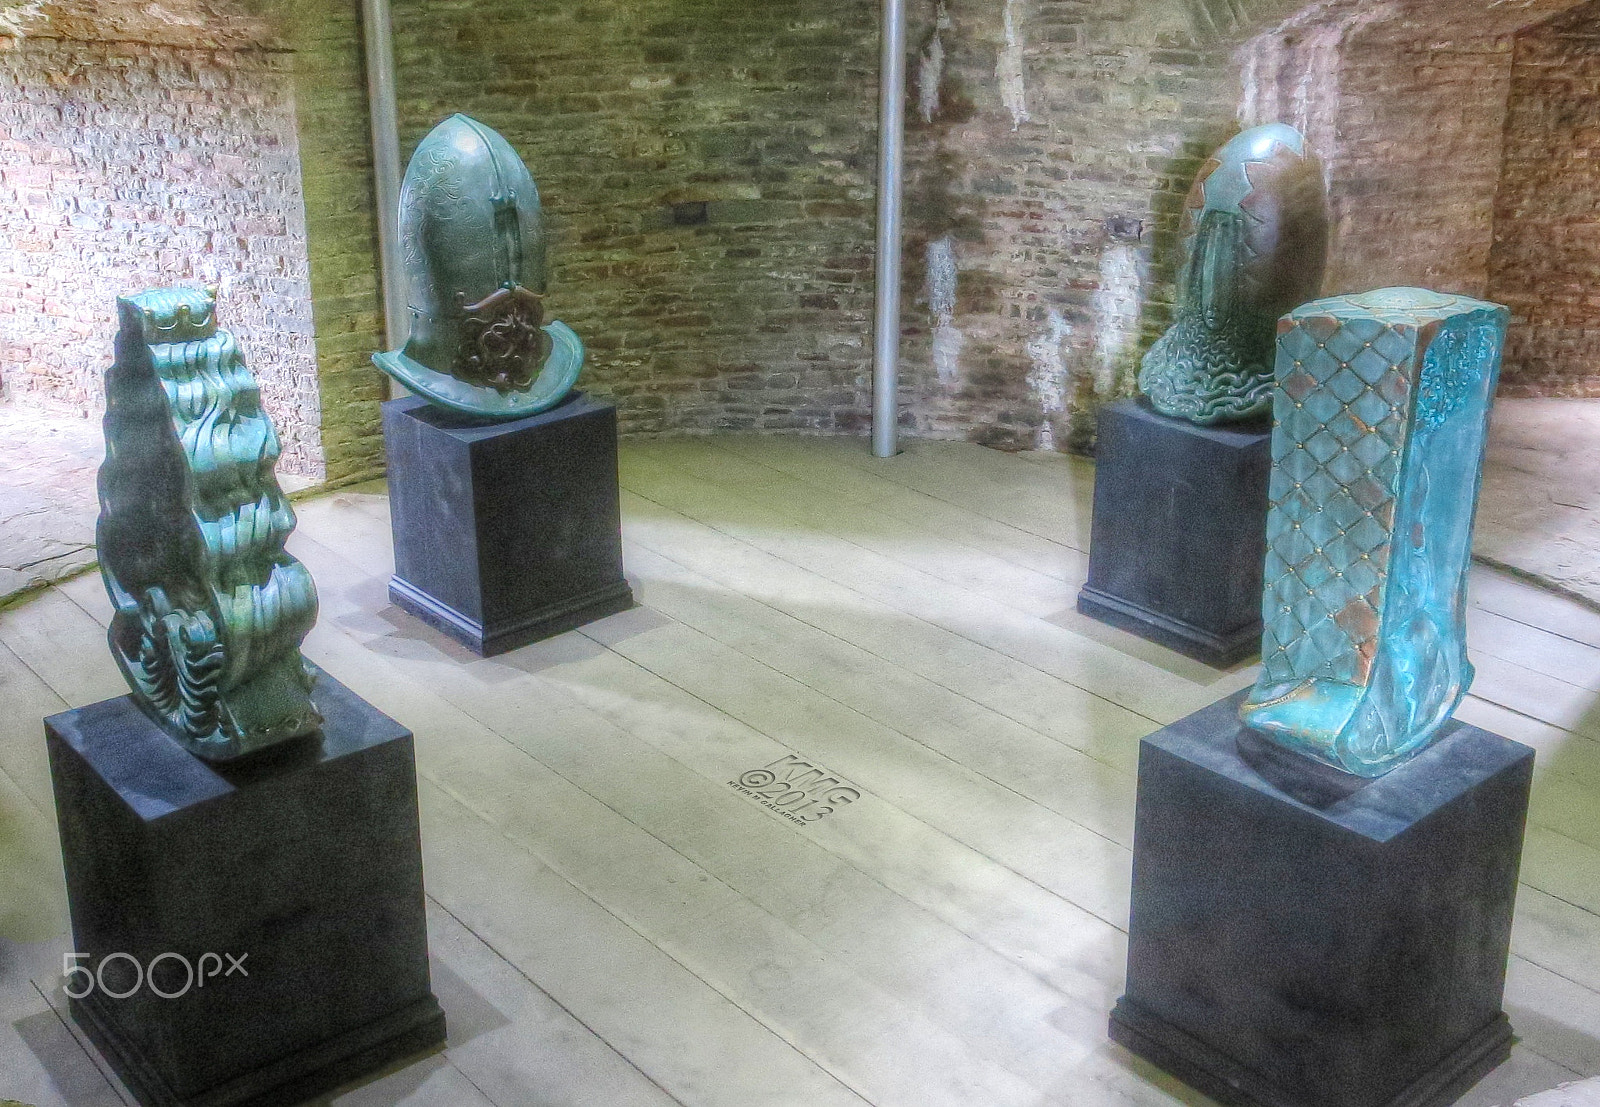 Canon PowerShot ELPH 330 HS (IXUS 255 HS / IXY 610F) sample photo. All four statues o photography